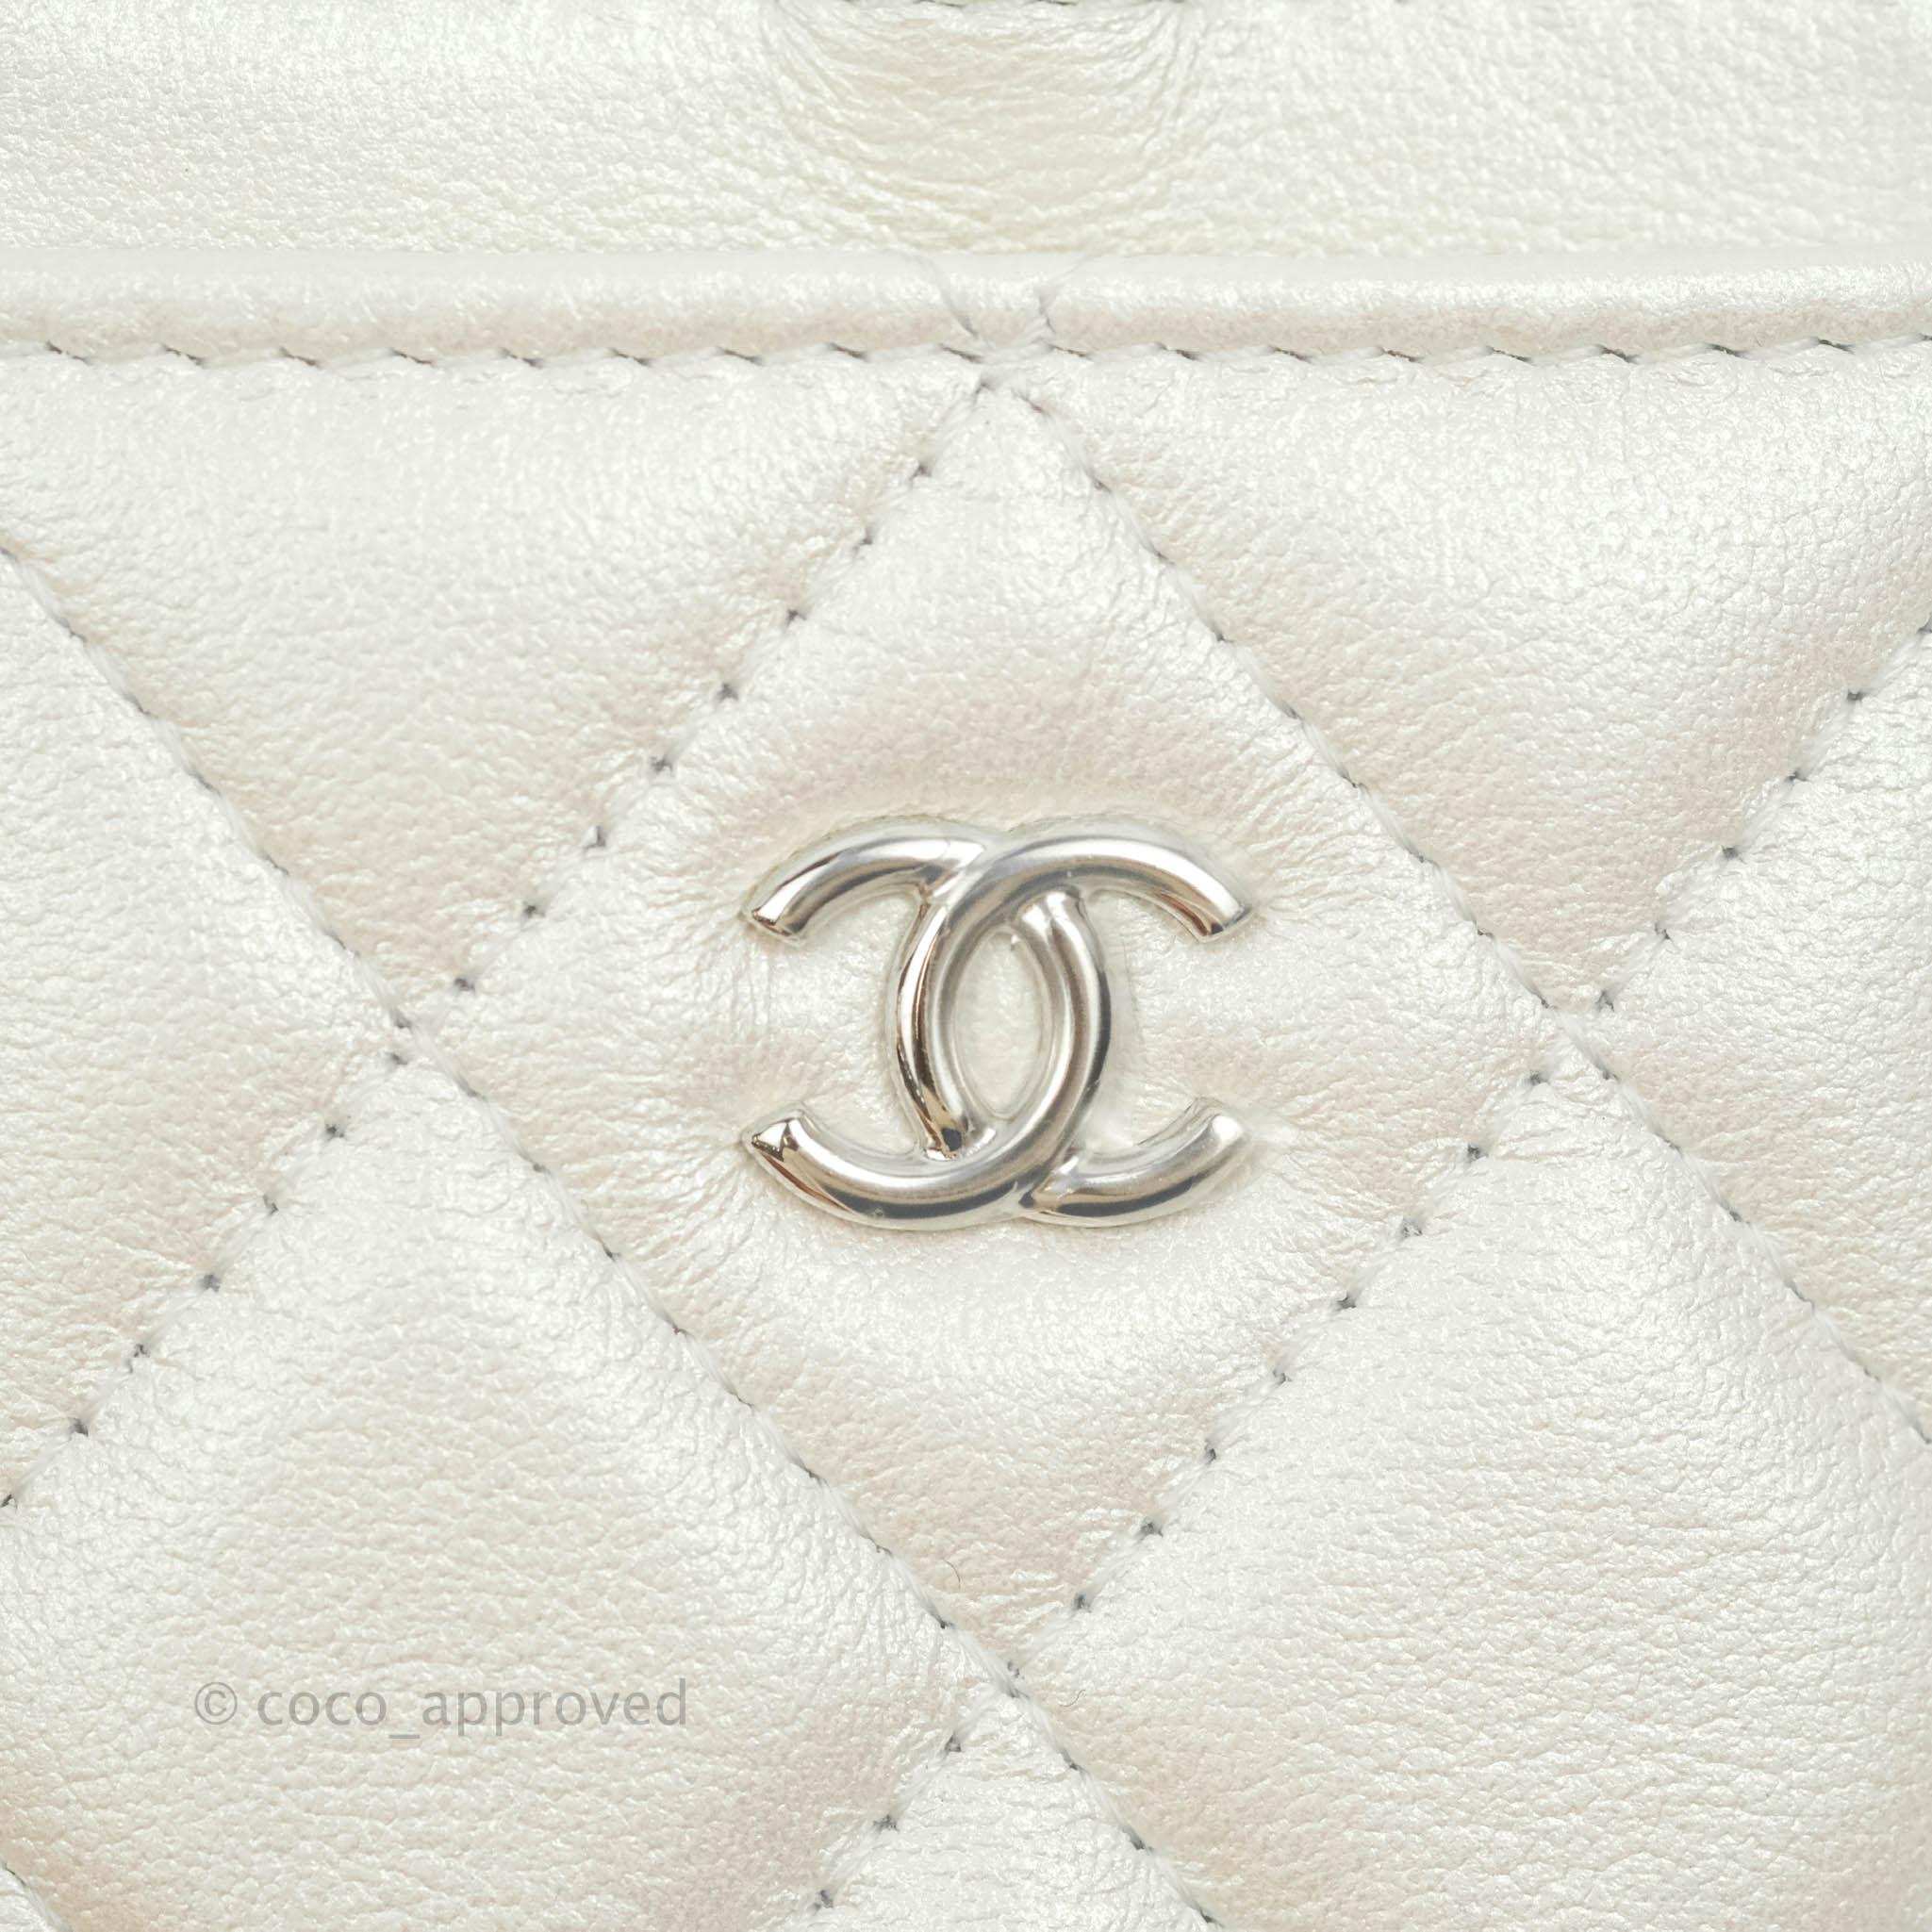 Chanel Classic Chain Card Holder Iridescent White Lambskin Silver